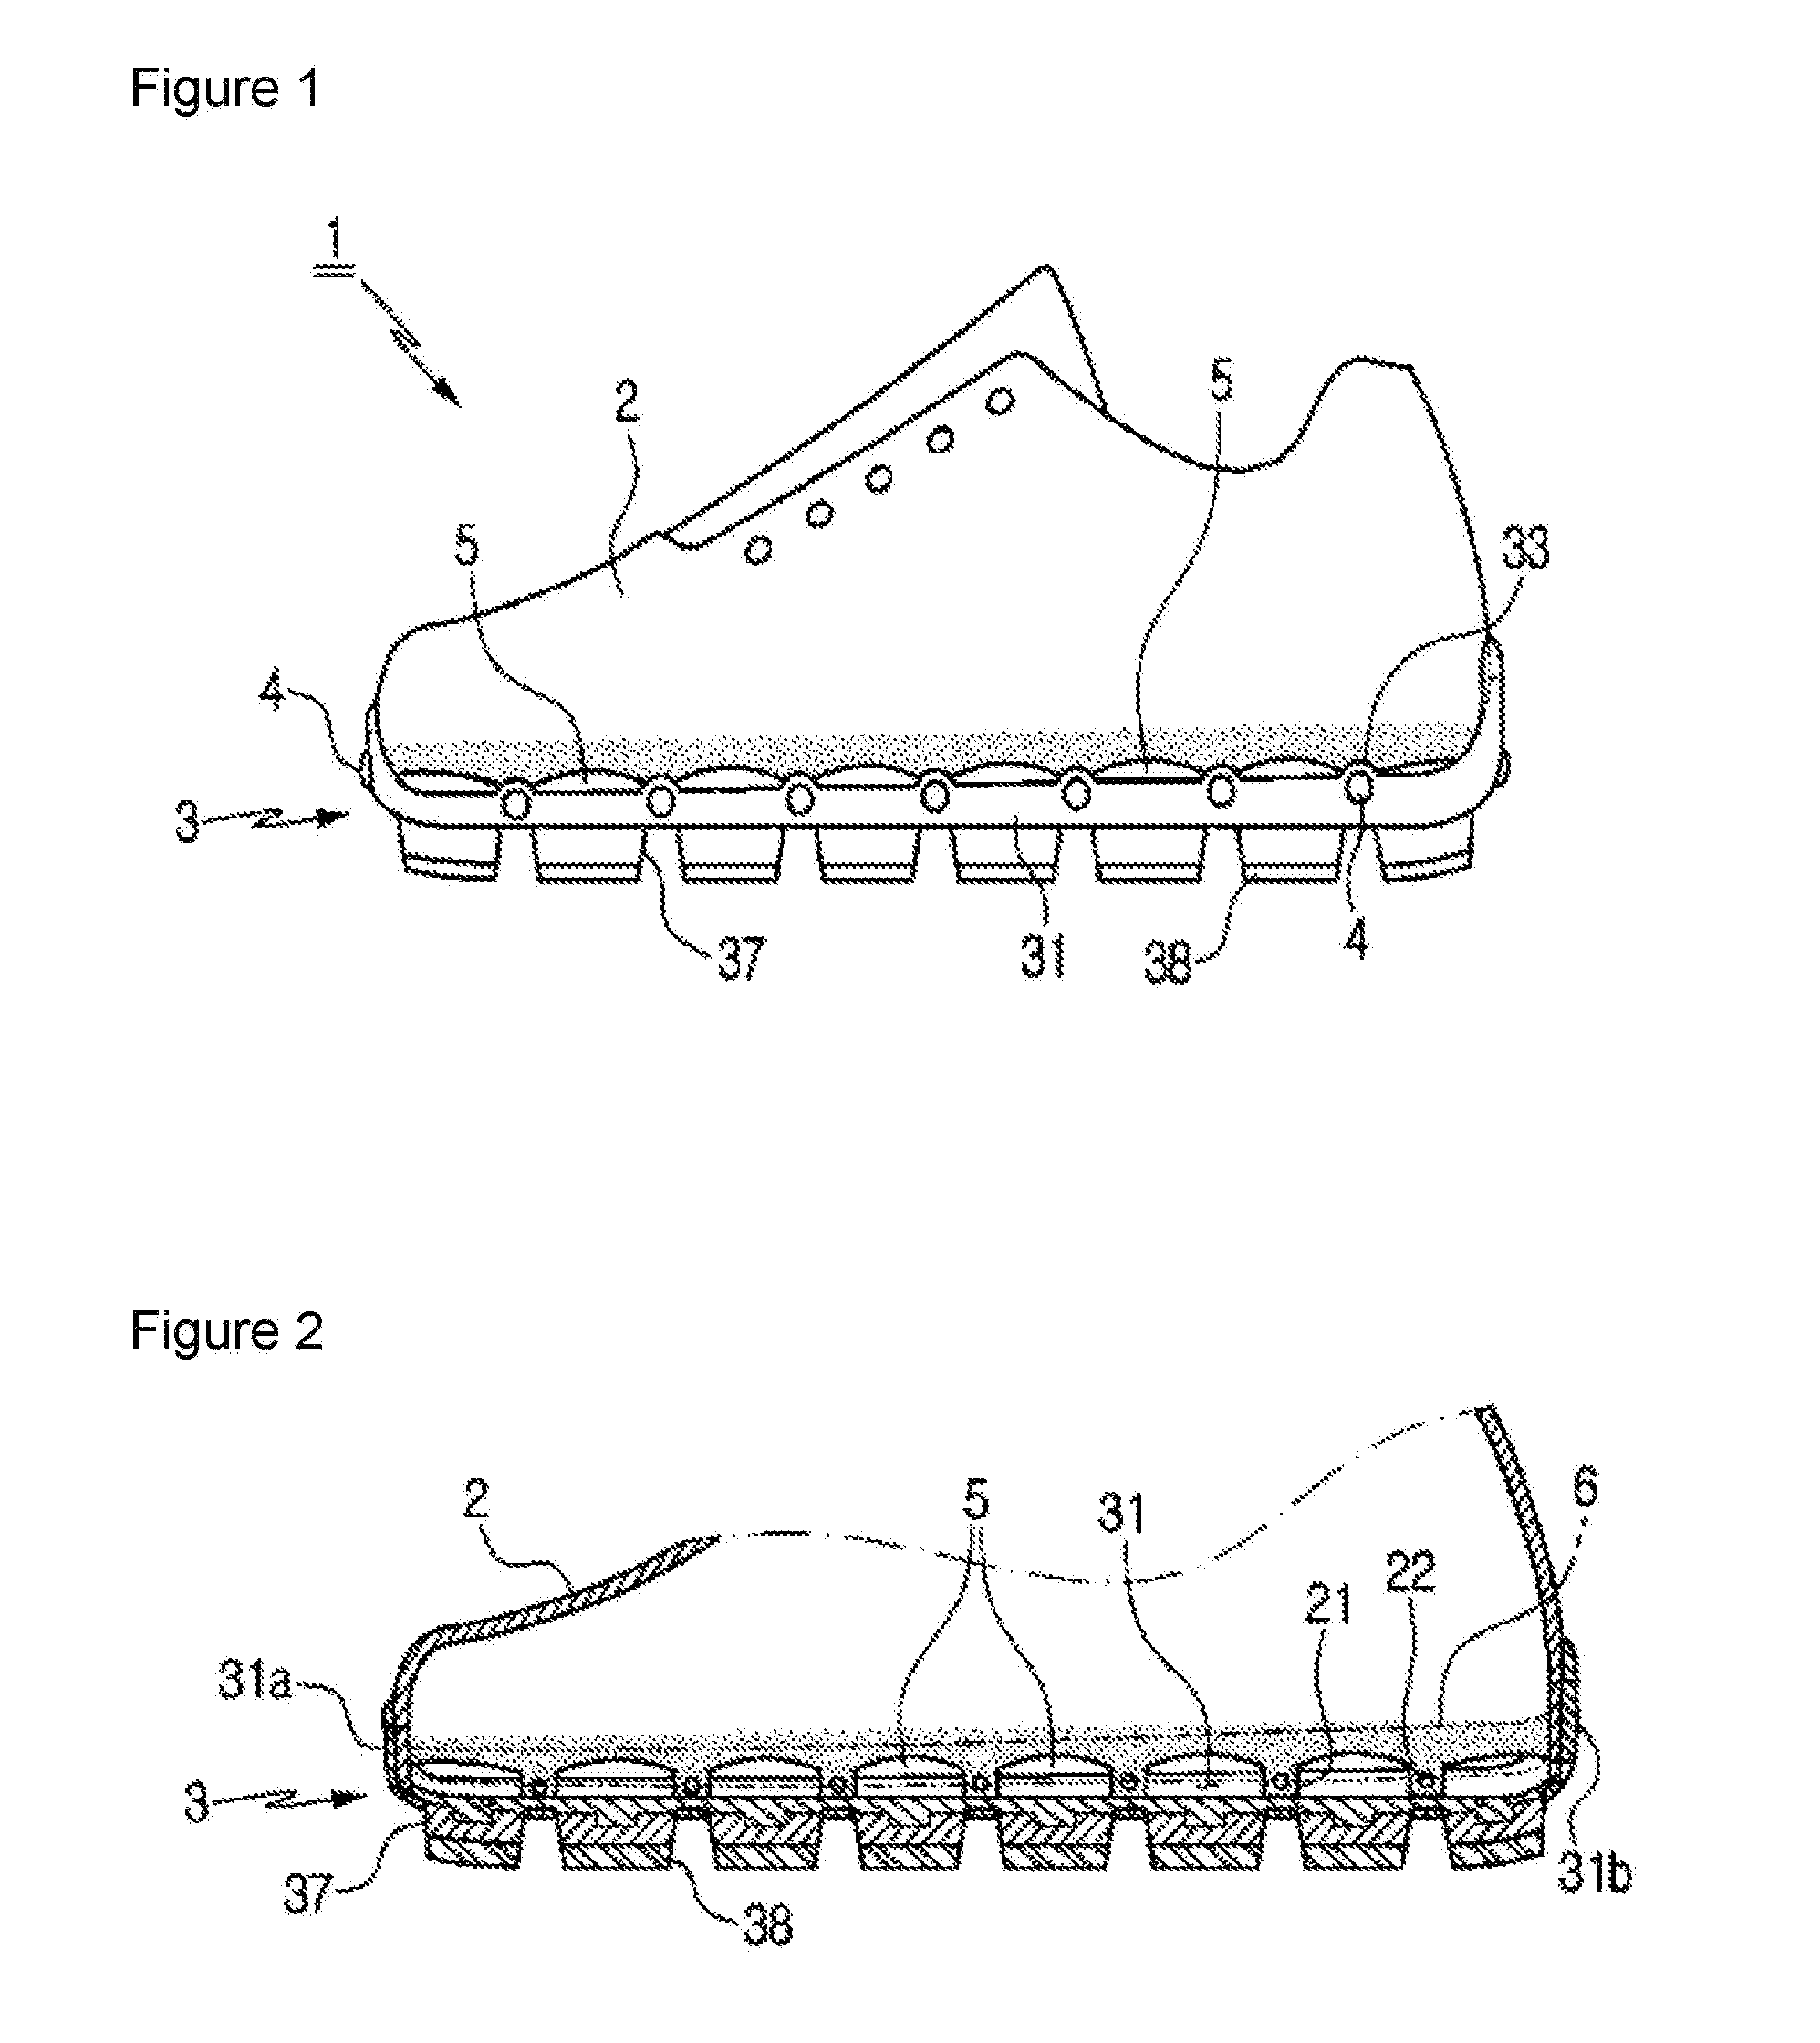 Gluing-free shoe and method for manufacturing same